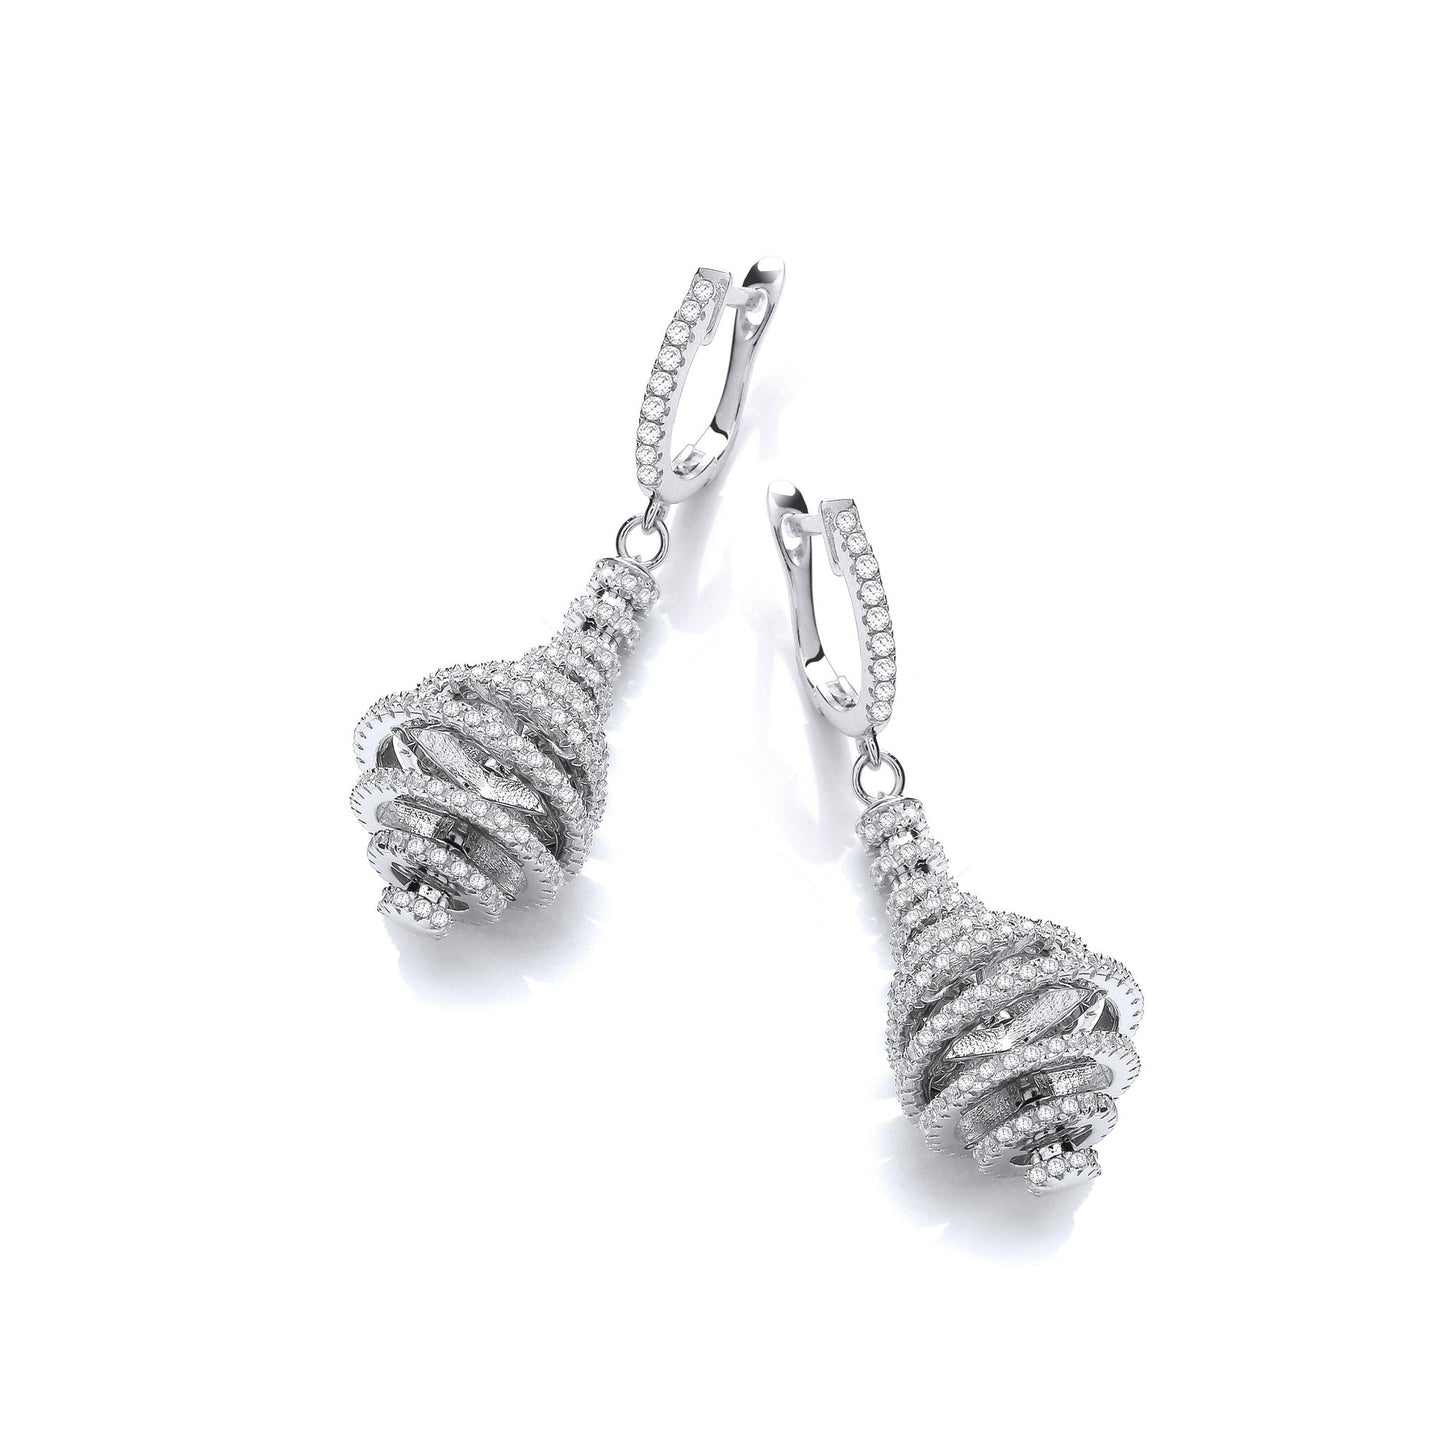 Drop 925 Sterling Silver Knot Earrings Set With CZs - FJewellery